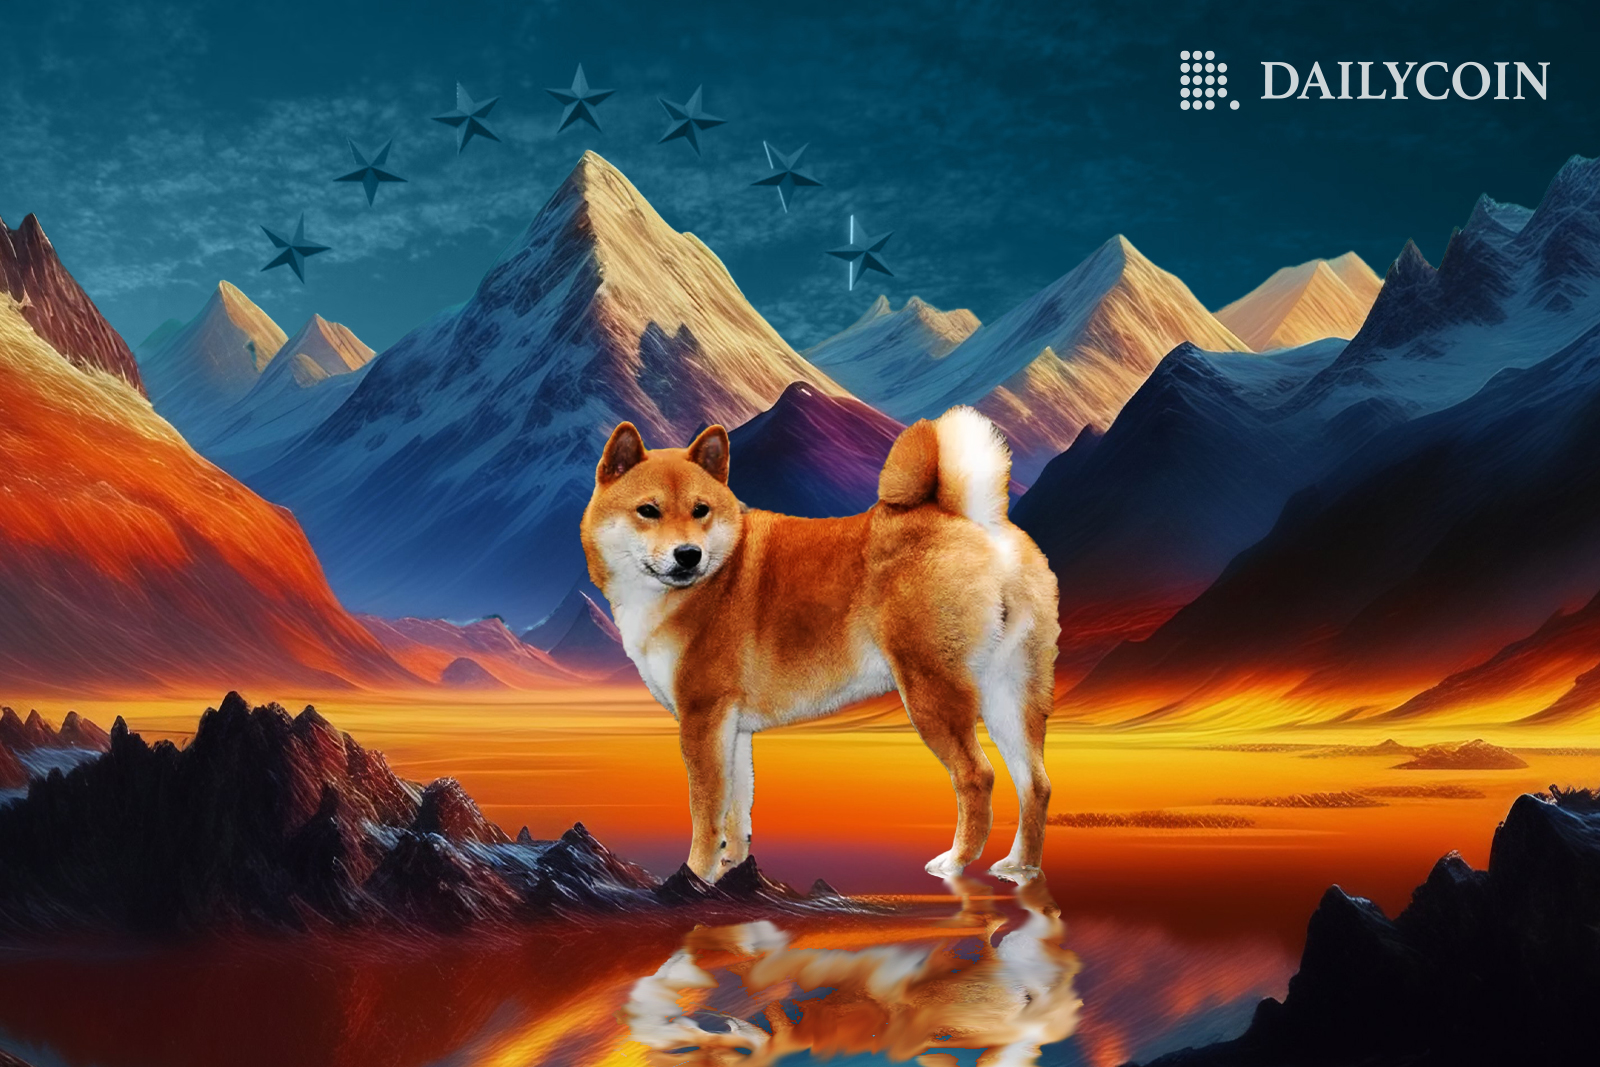 Shiba Inu dog standing in the middle of a lake as Paramount stars are hovering on top of a big mountain.